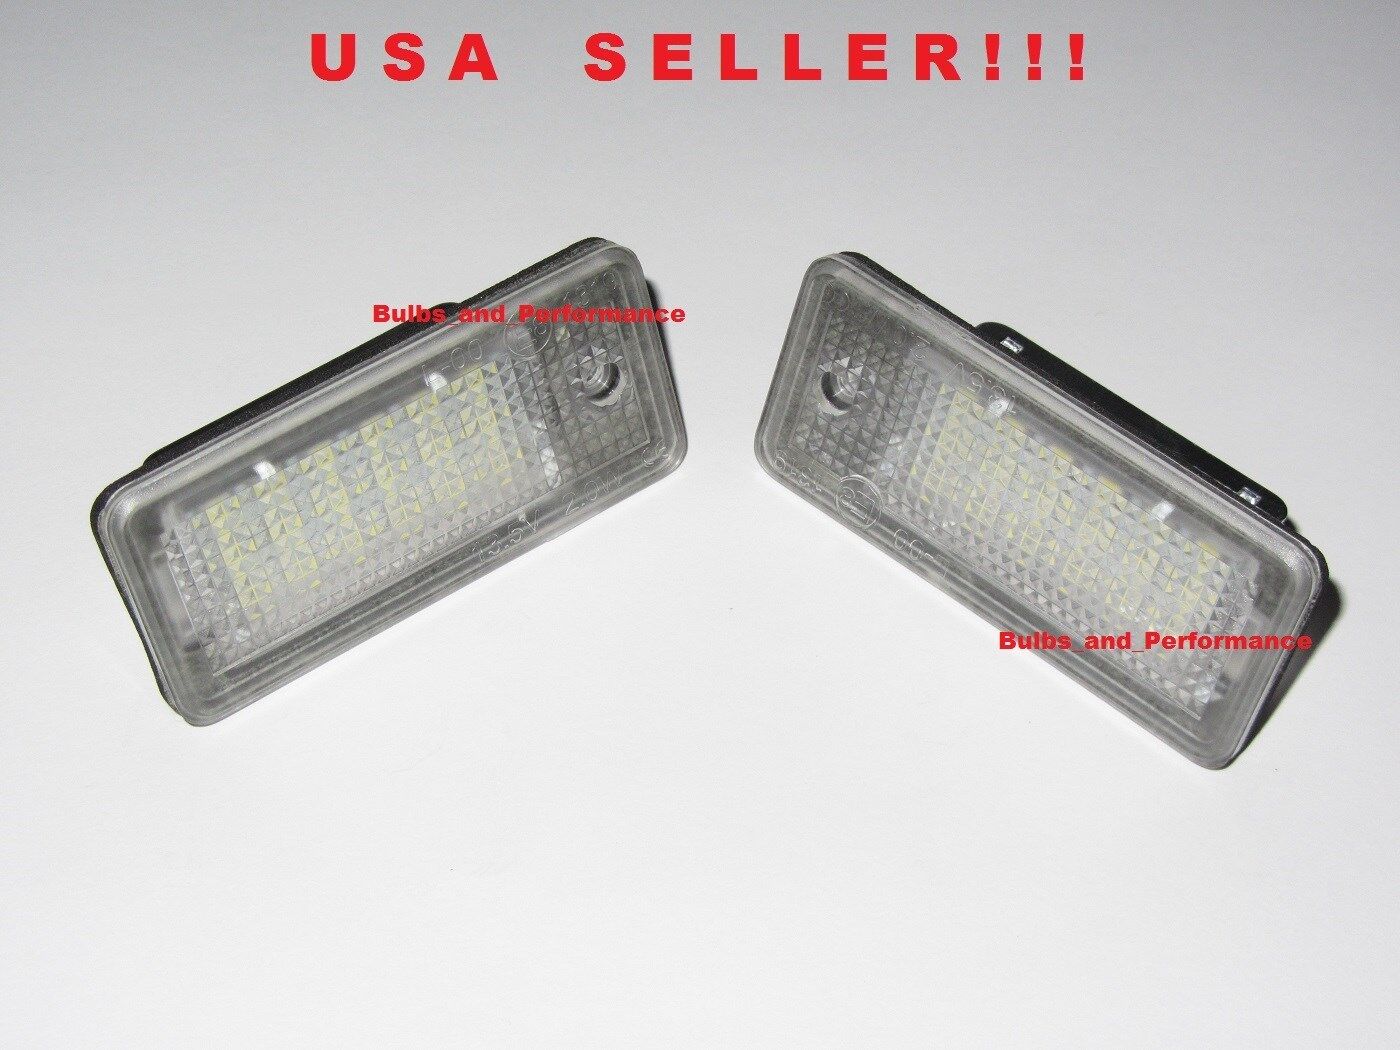 Audi A3 S3 LED License Plate Lights for years 2004 2005 2006 2007 2008 2009 NEW